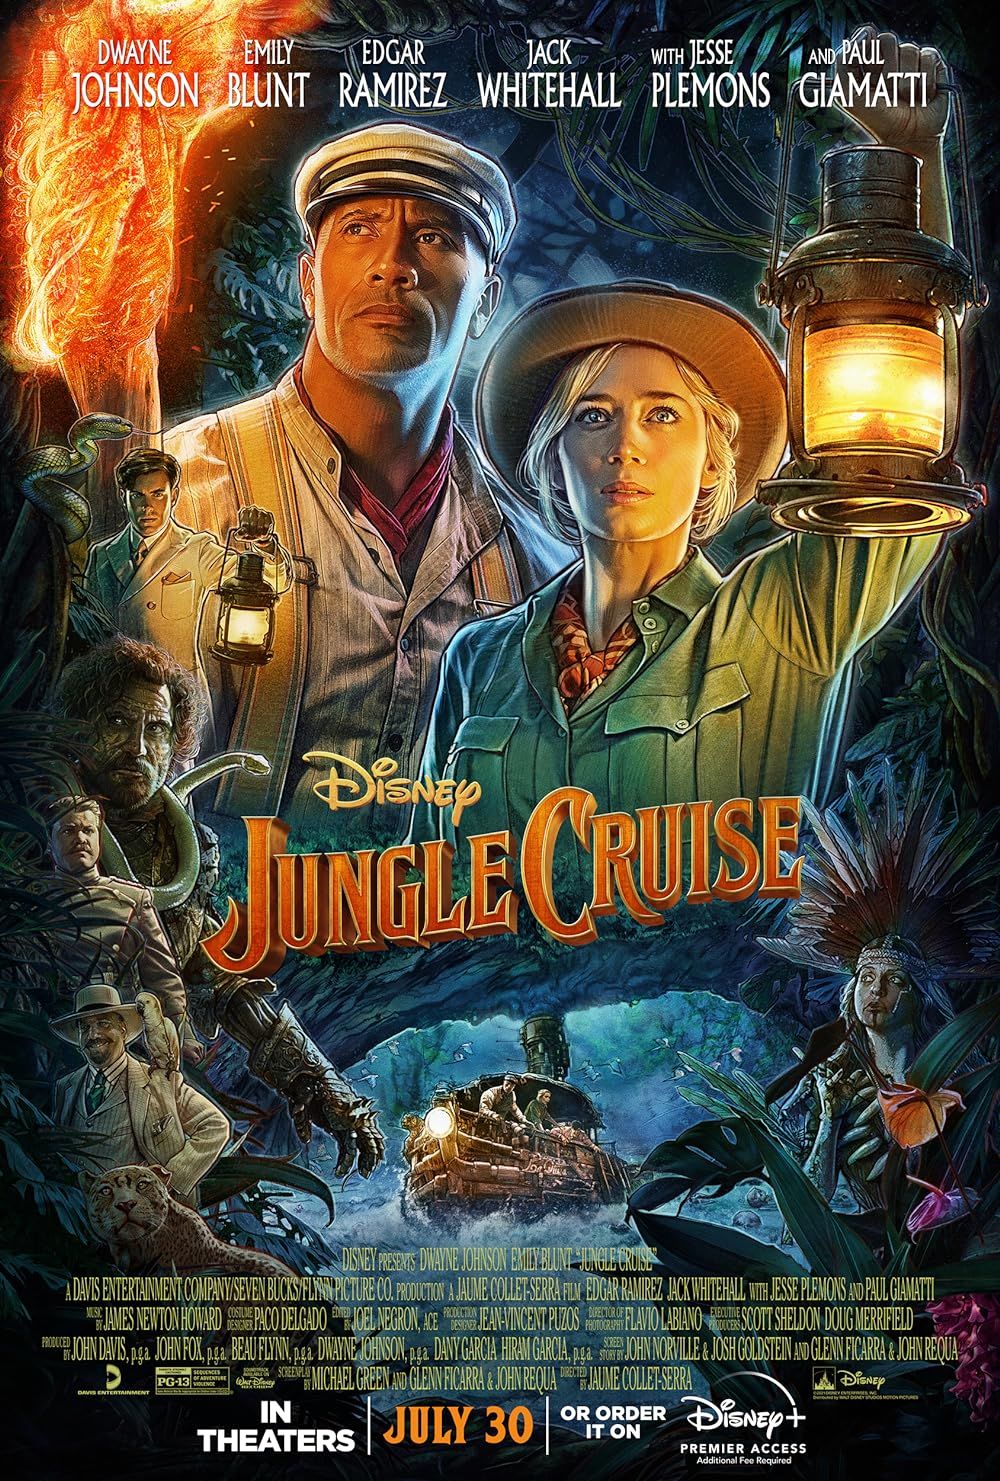 Emily Blunt and Dwayne Johnson on the poster of Jungle Cruise